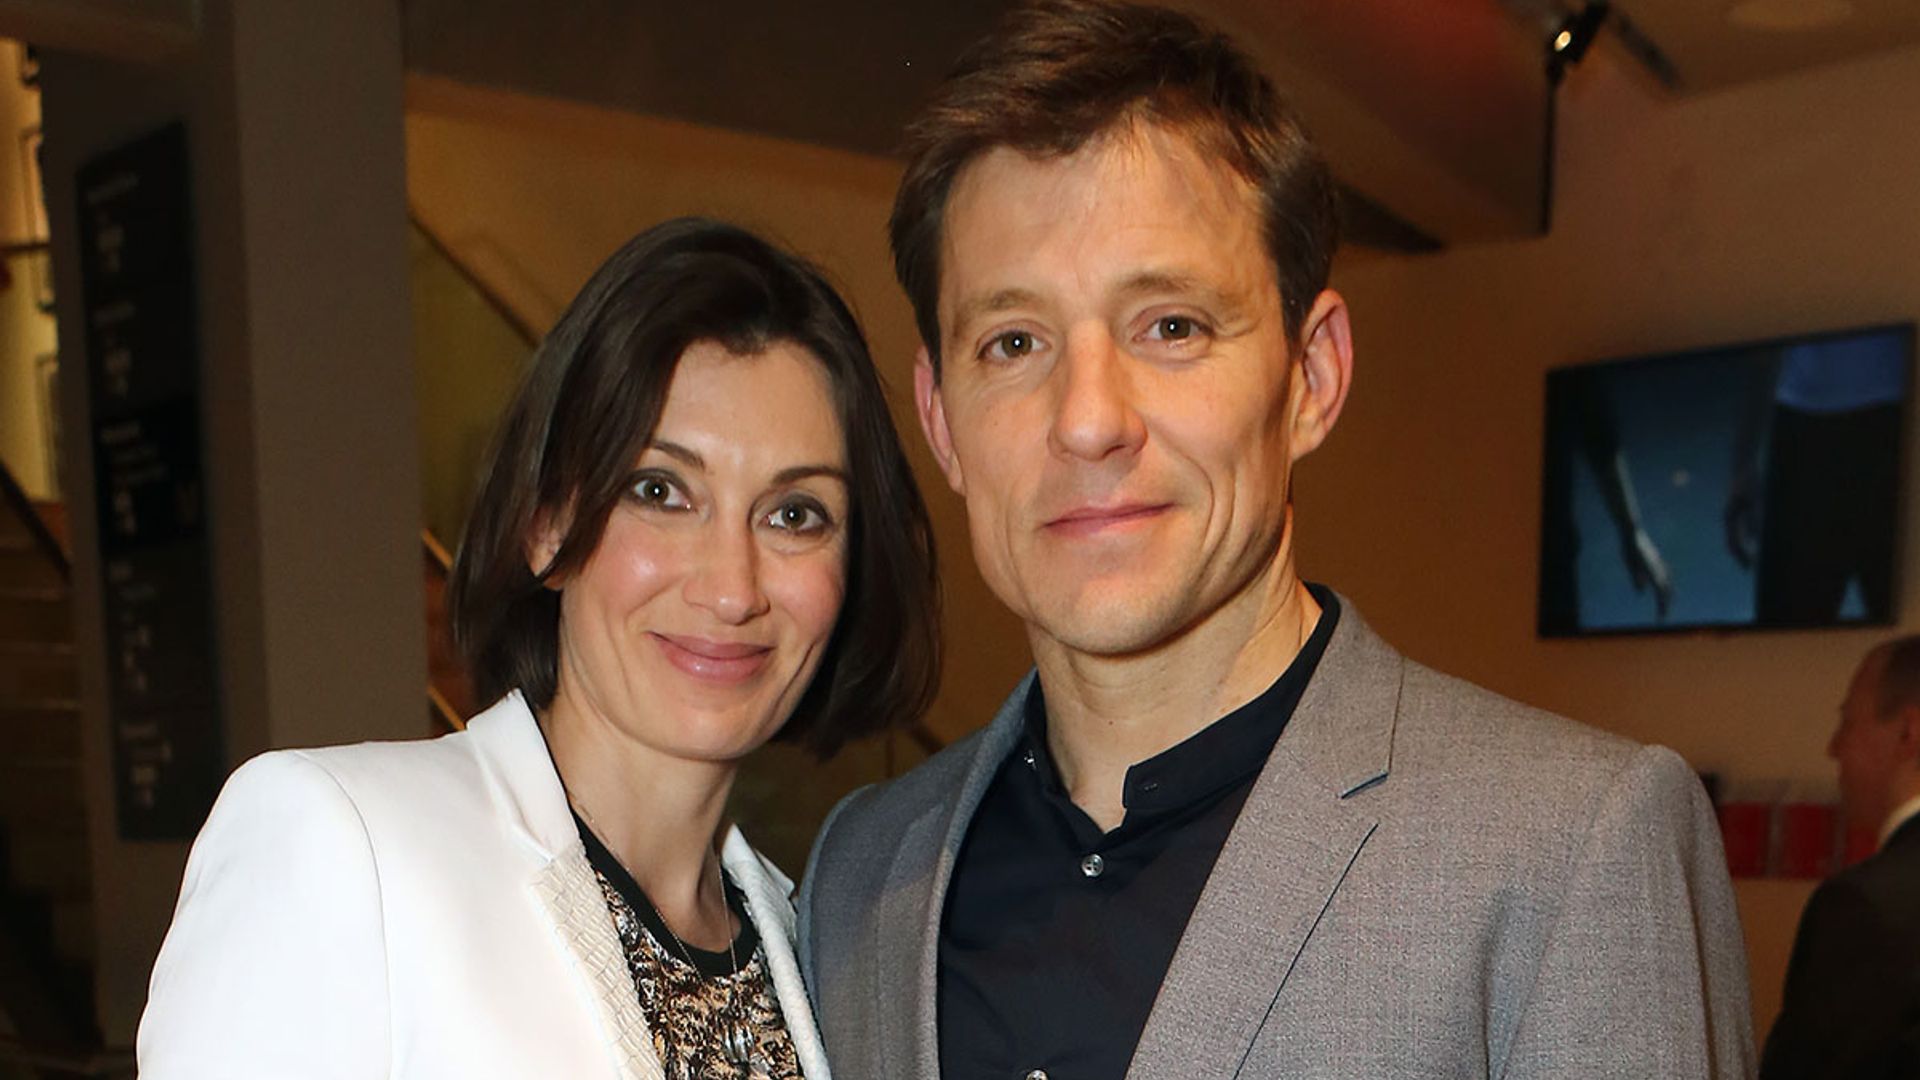 Ben Shephard's romantic date with wife Annie wows fans – see their incredible cocktails